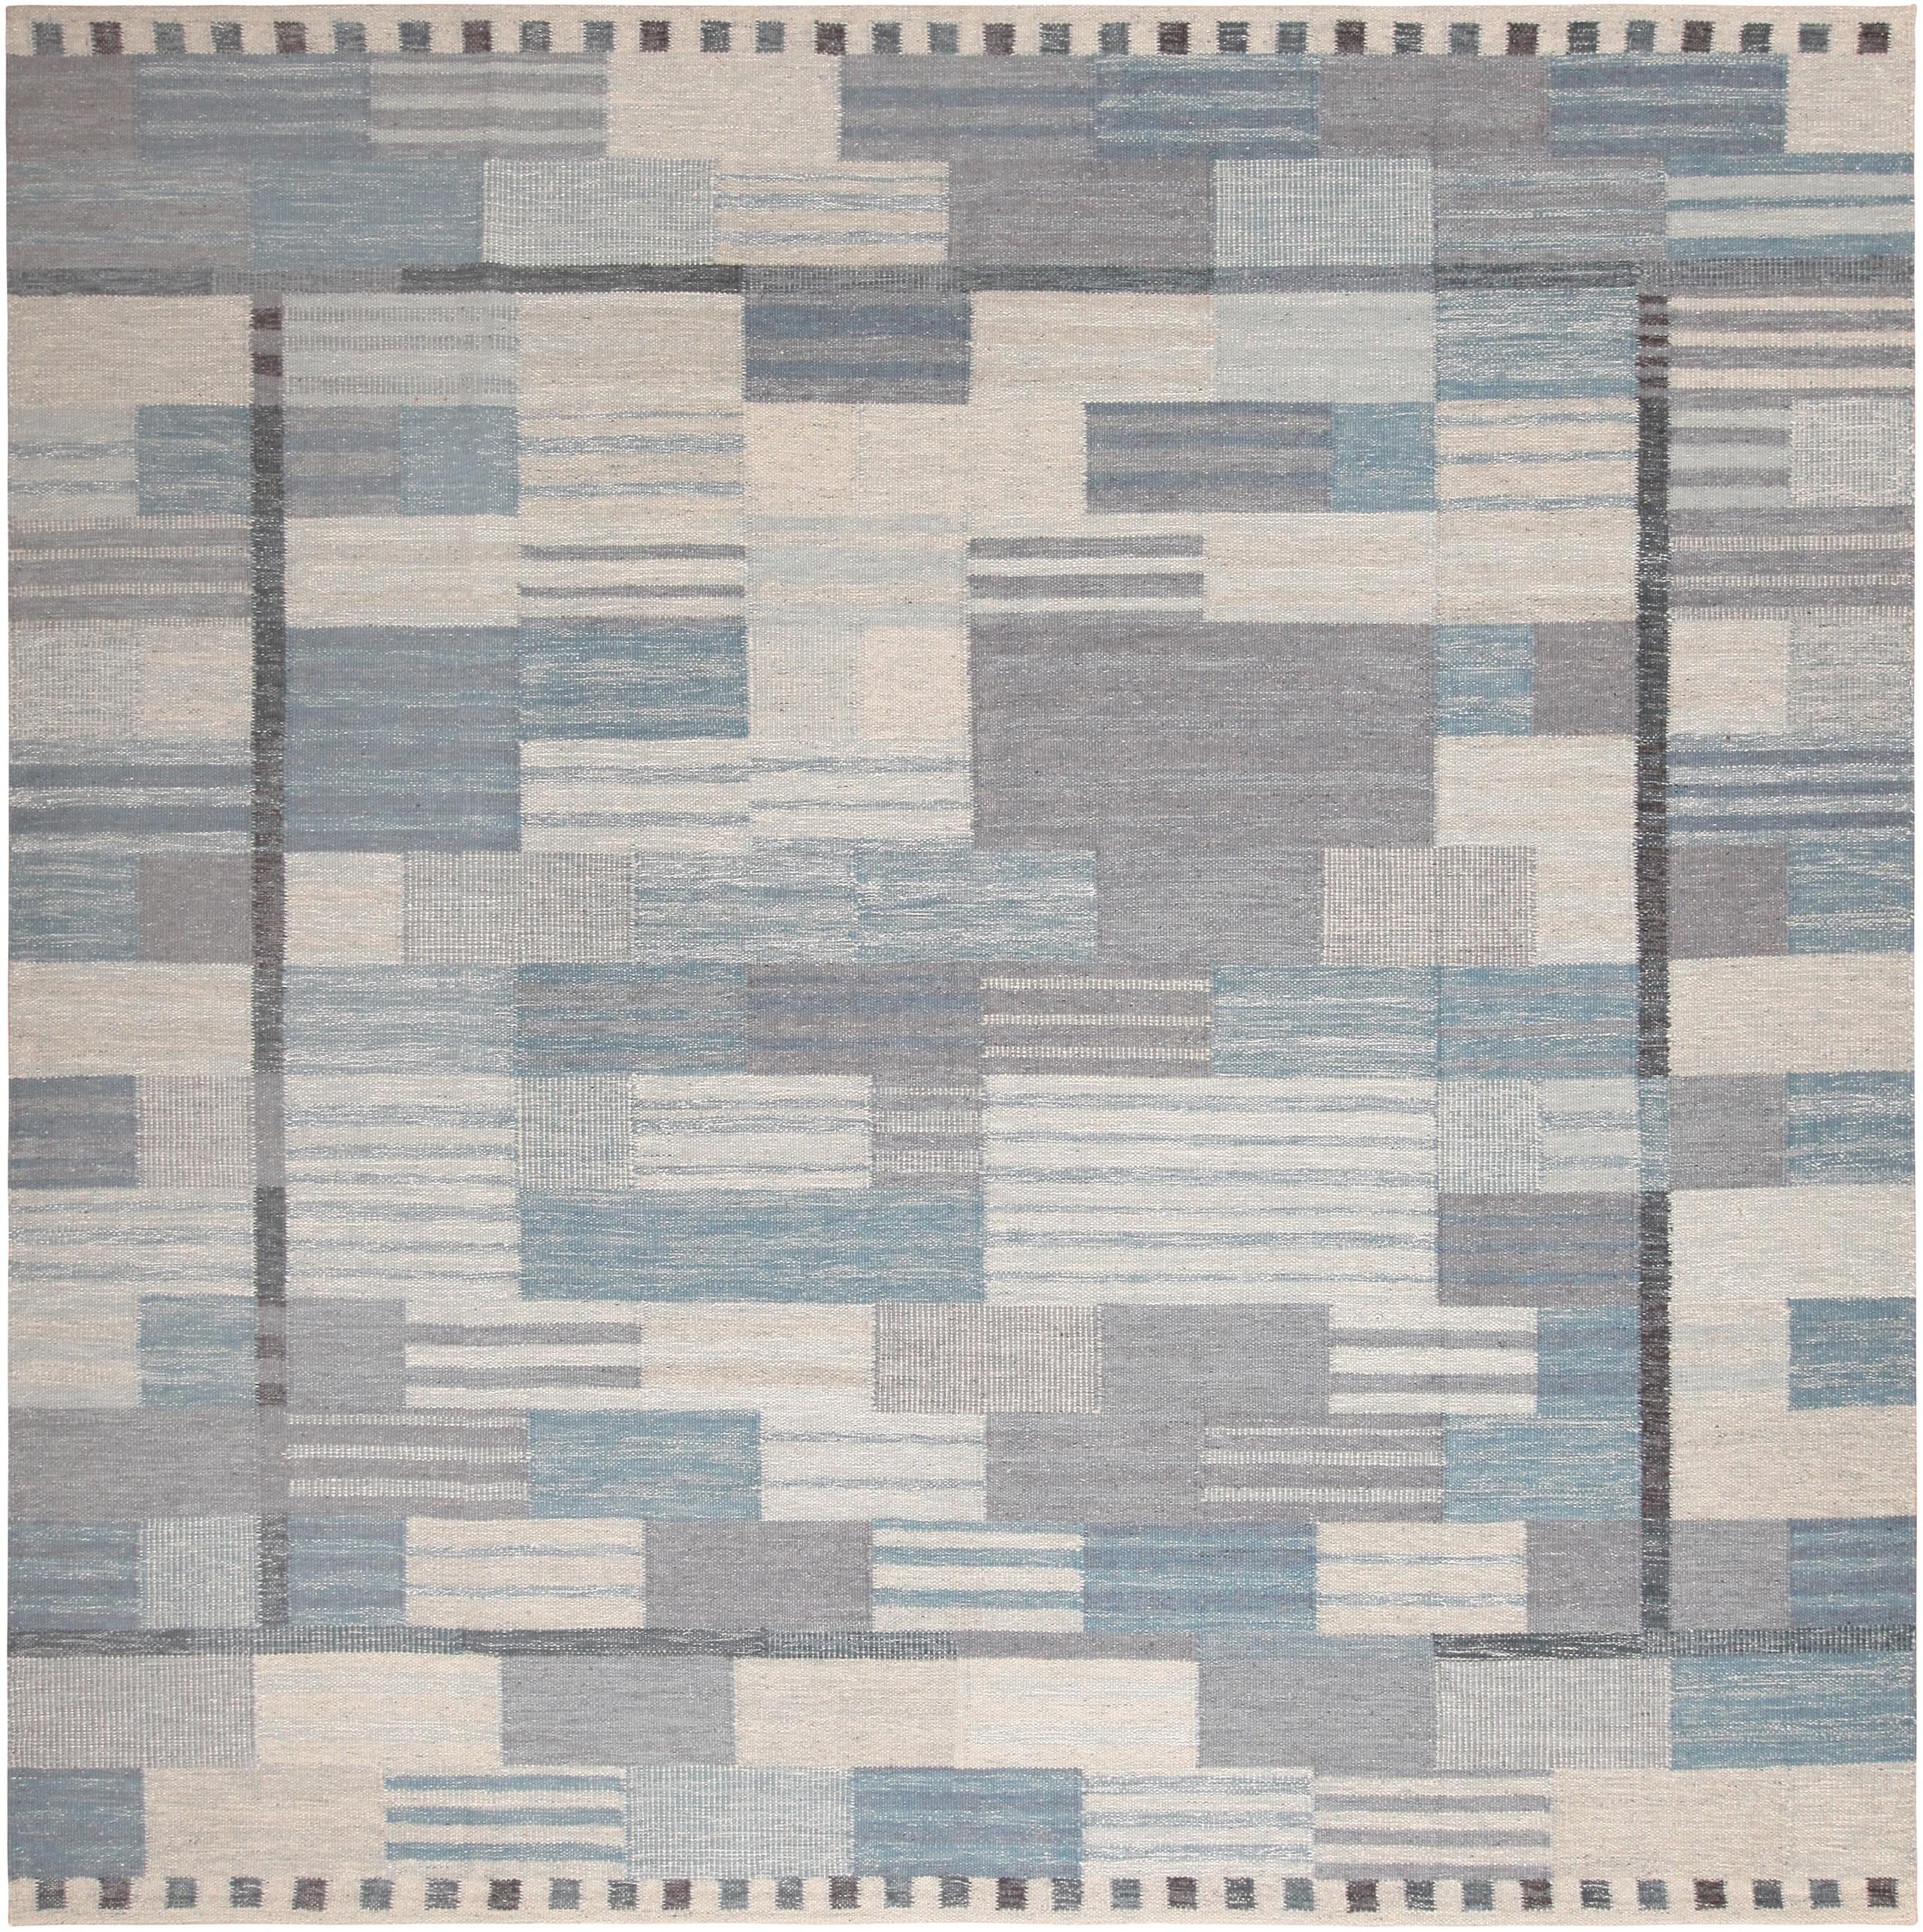 Square Modern Geometric Swedish Inspired Flat Woven Area Rug. 12 ft x 12 ft 1 in